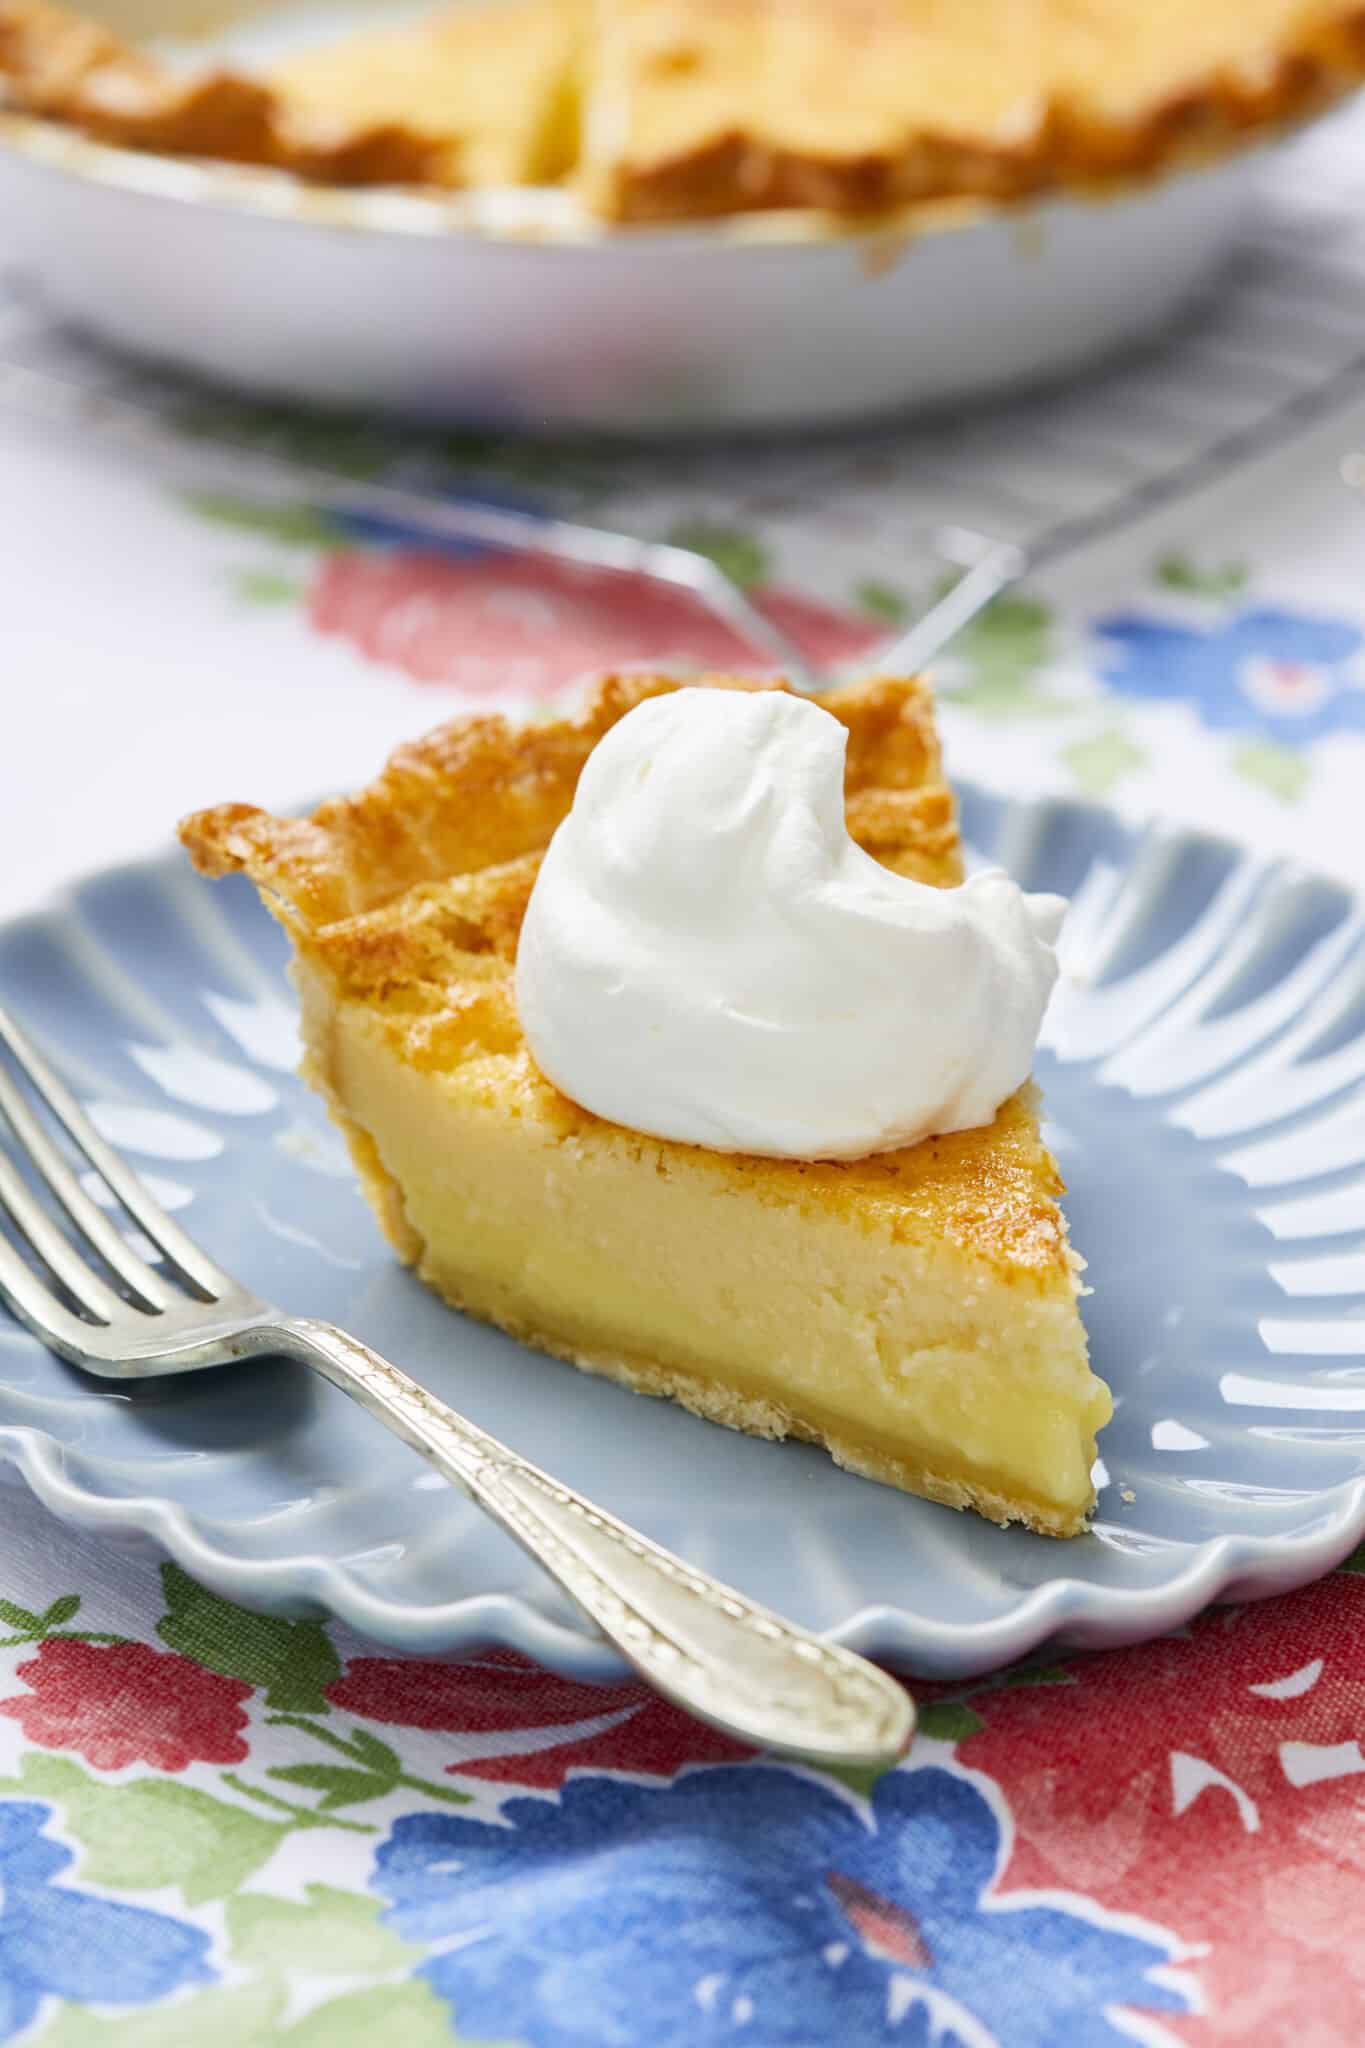 A close shot at a slice of an Irresistible Buttermilk Pie which is baked perfect with flaky, golden-brown crust and creamy, tangy filling topped with a dollop of whipped cream on a dessert plate. The rest of the pie is cooling on a wire rack.